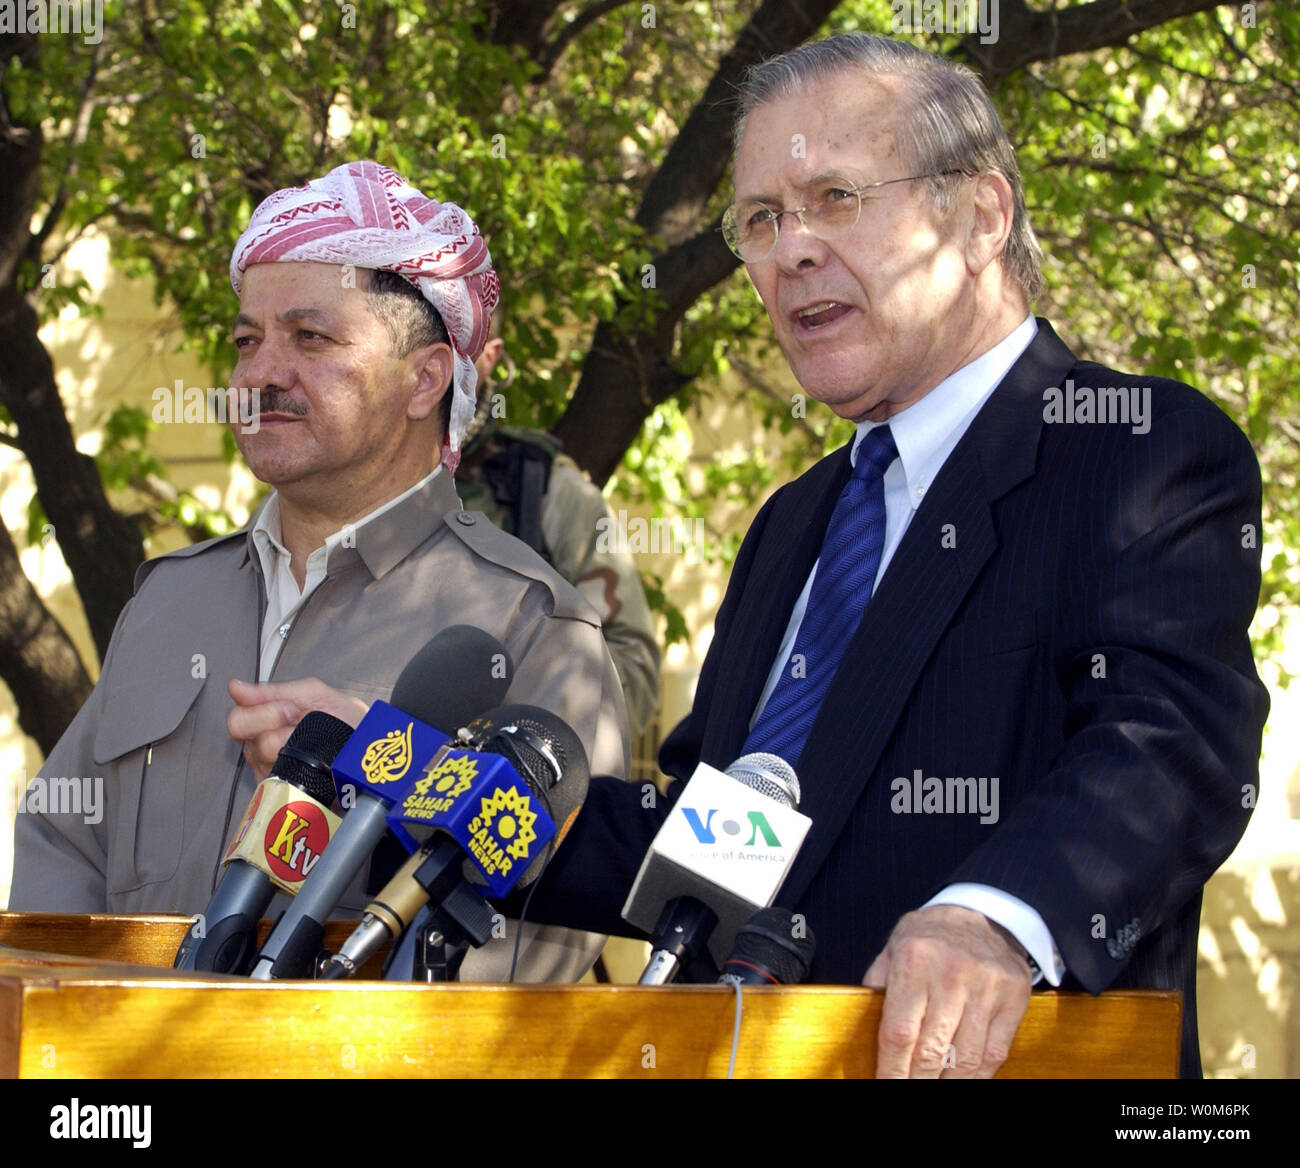 Secretary of Defense Donald H. Rumsfeld and Massoud Barzani conduct a press conference in Sala Huddin, Iraq, on April 12, 2005.  Rumsfeld earlier met with Barzani and other leaders of the Kurdish Democratic Party to discuss points of mutual interest. Rumsfeld is in Iraq to visit with U.S. and coalition forces and to meet with the newly elected members of the Iraqi government.  (UPI Photo/ Cherie A. Thurlby/Air Force) Stock Photo